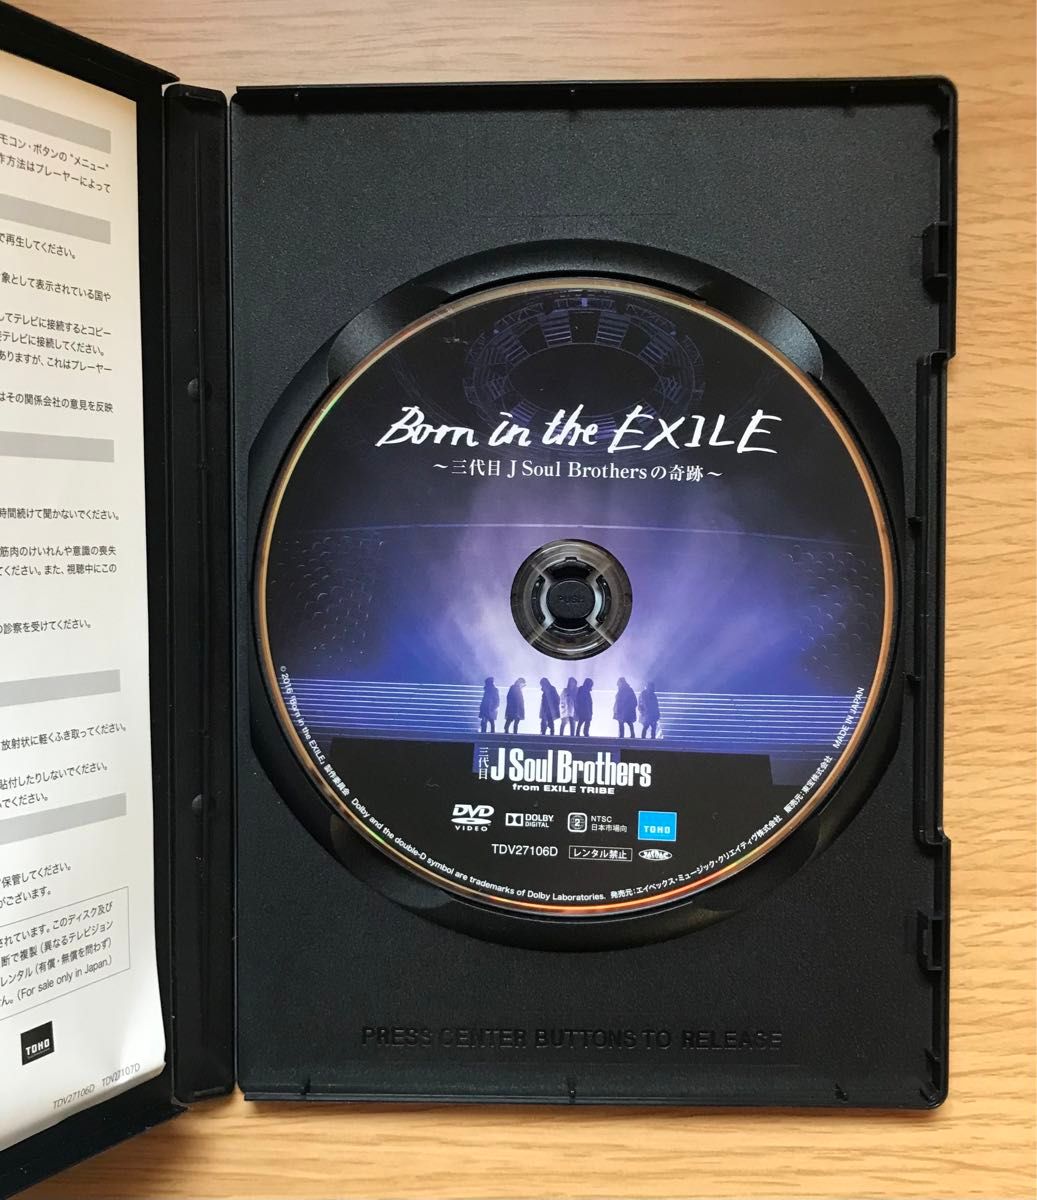 Born in the EXILE～三代目 J Soul Brothersの奇跡